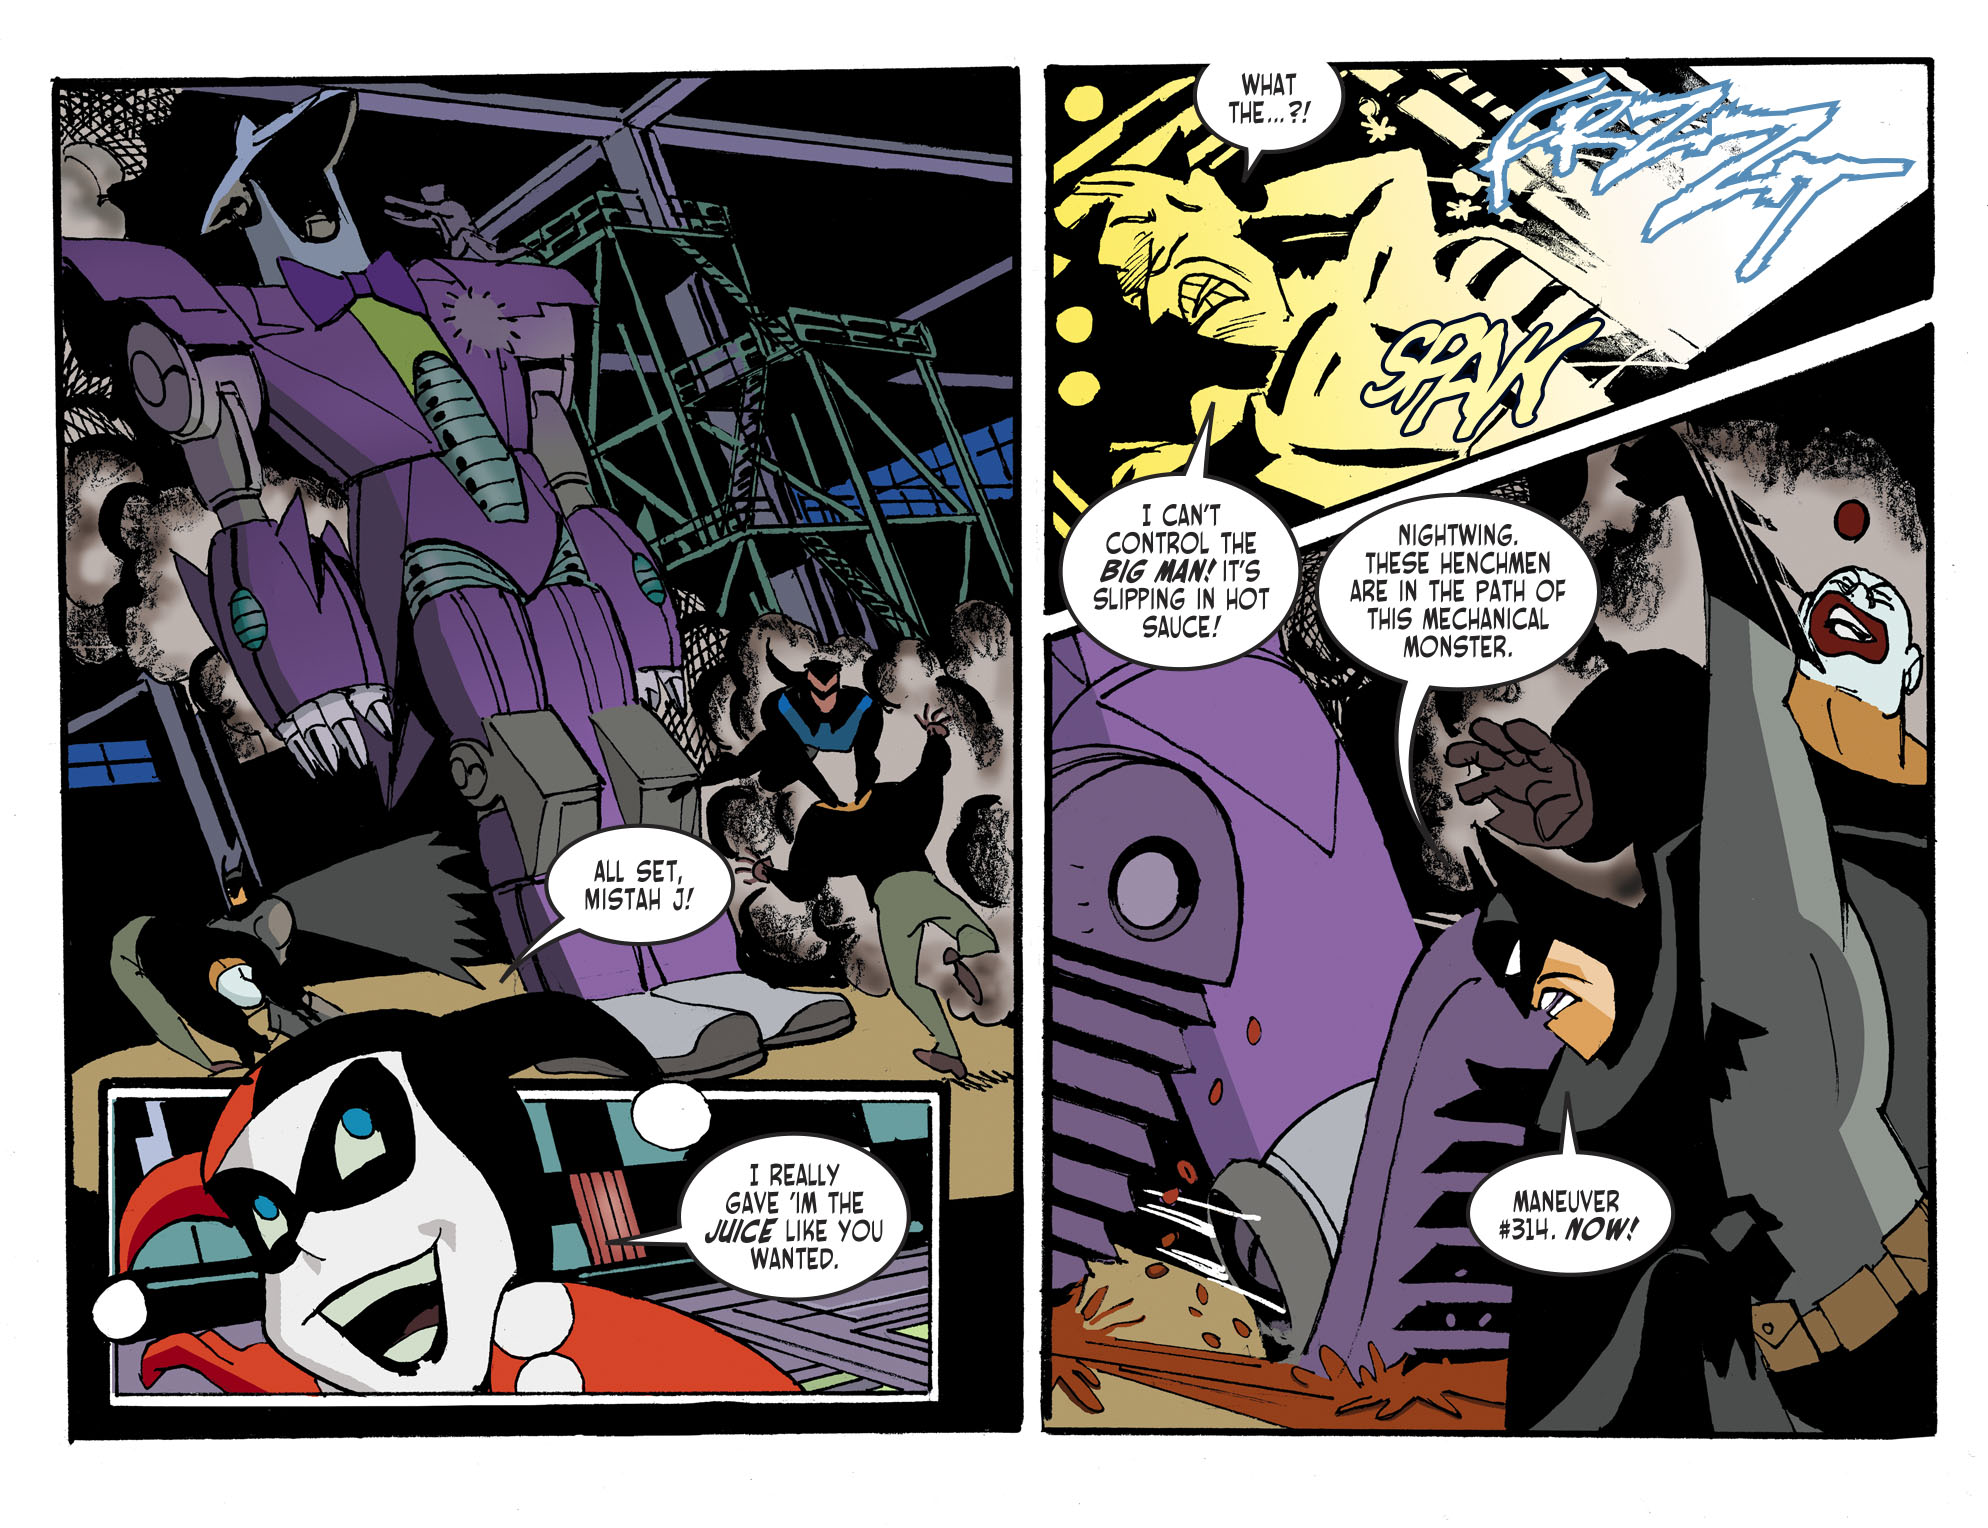 In The New Harley Quinn And Batman Comic, Classic Harley Gets An Important, Modern Update